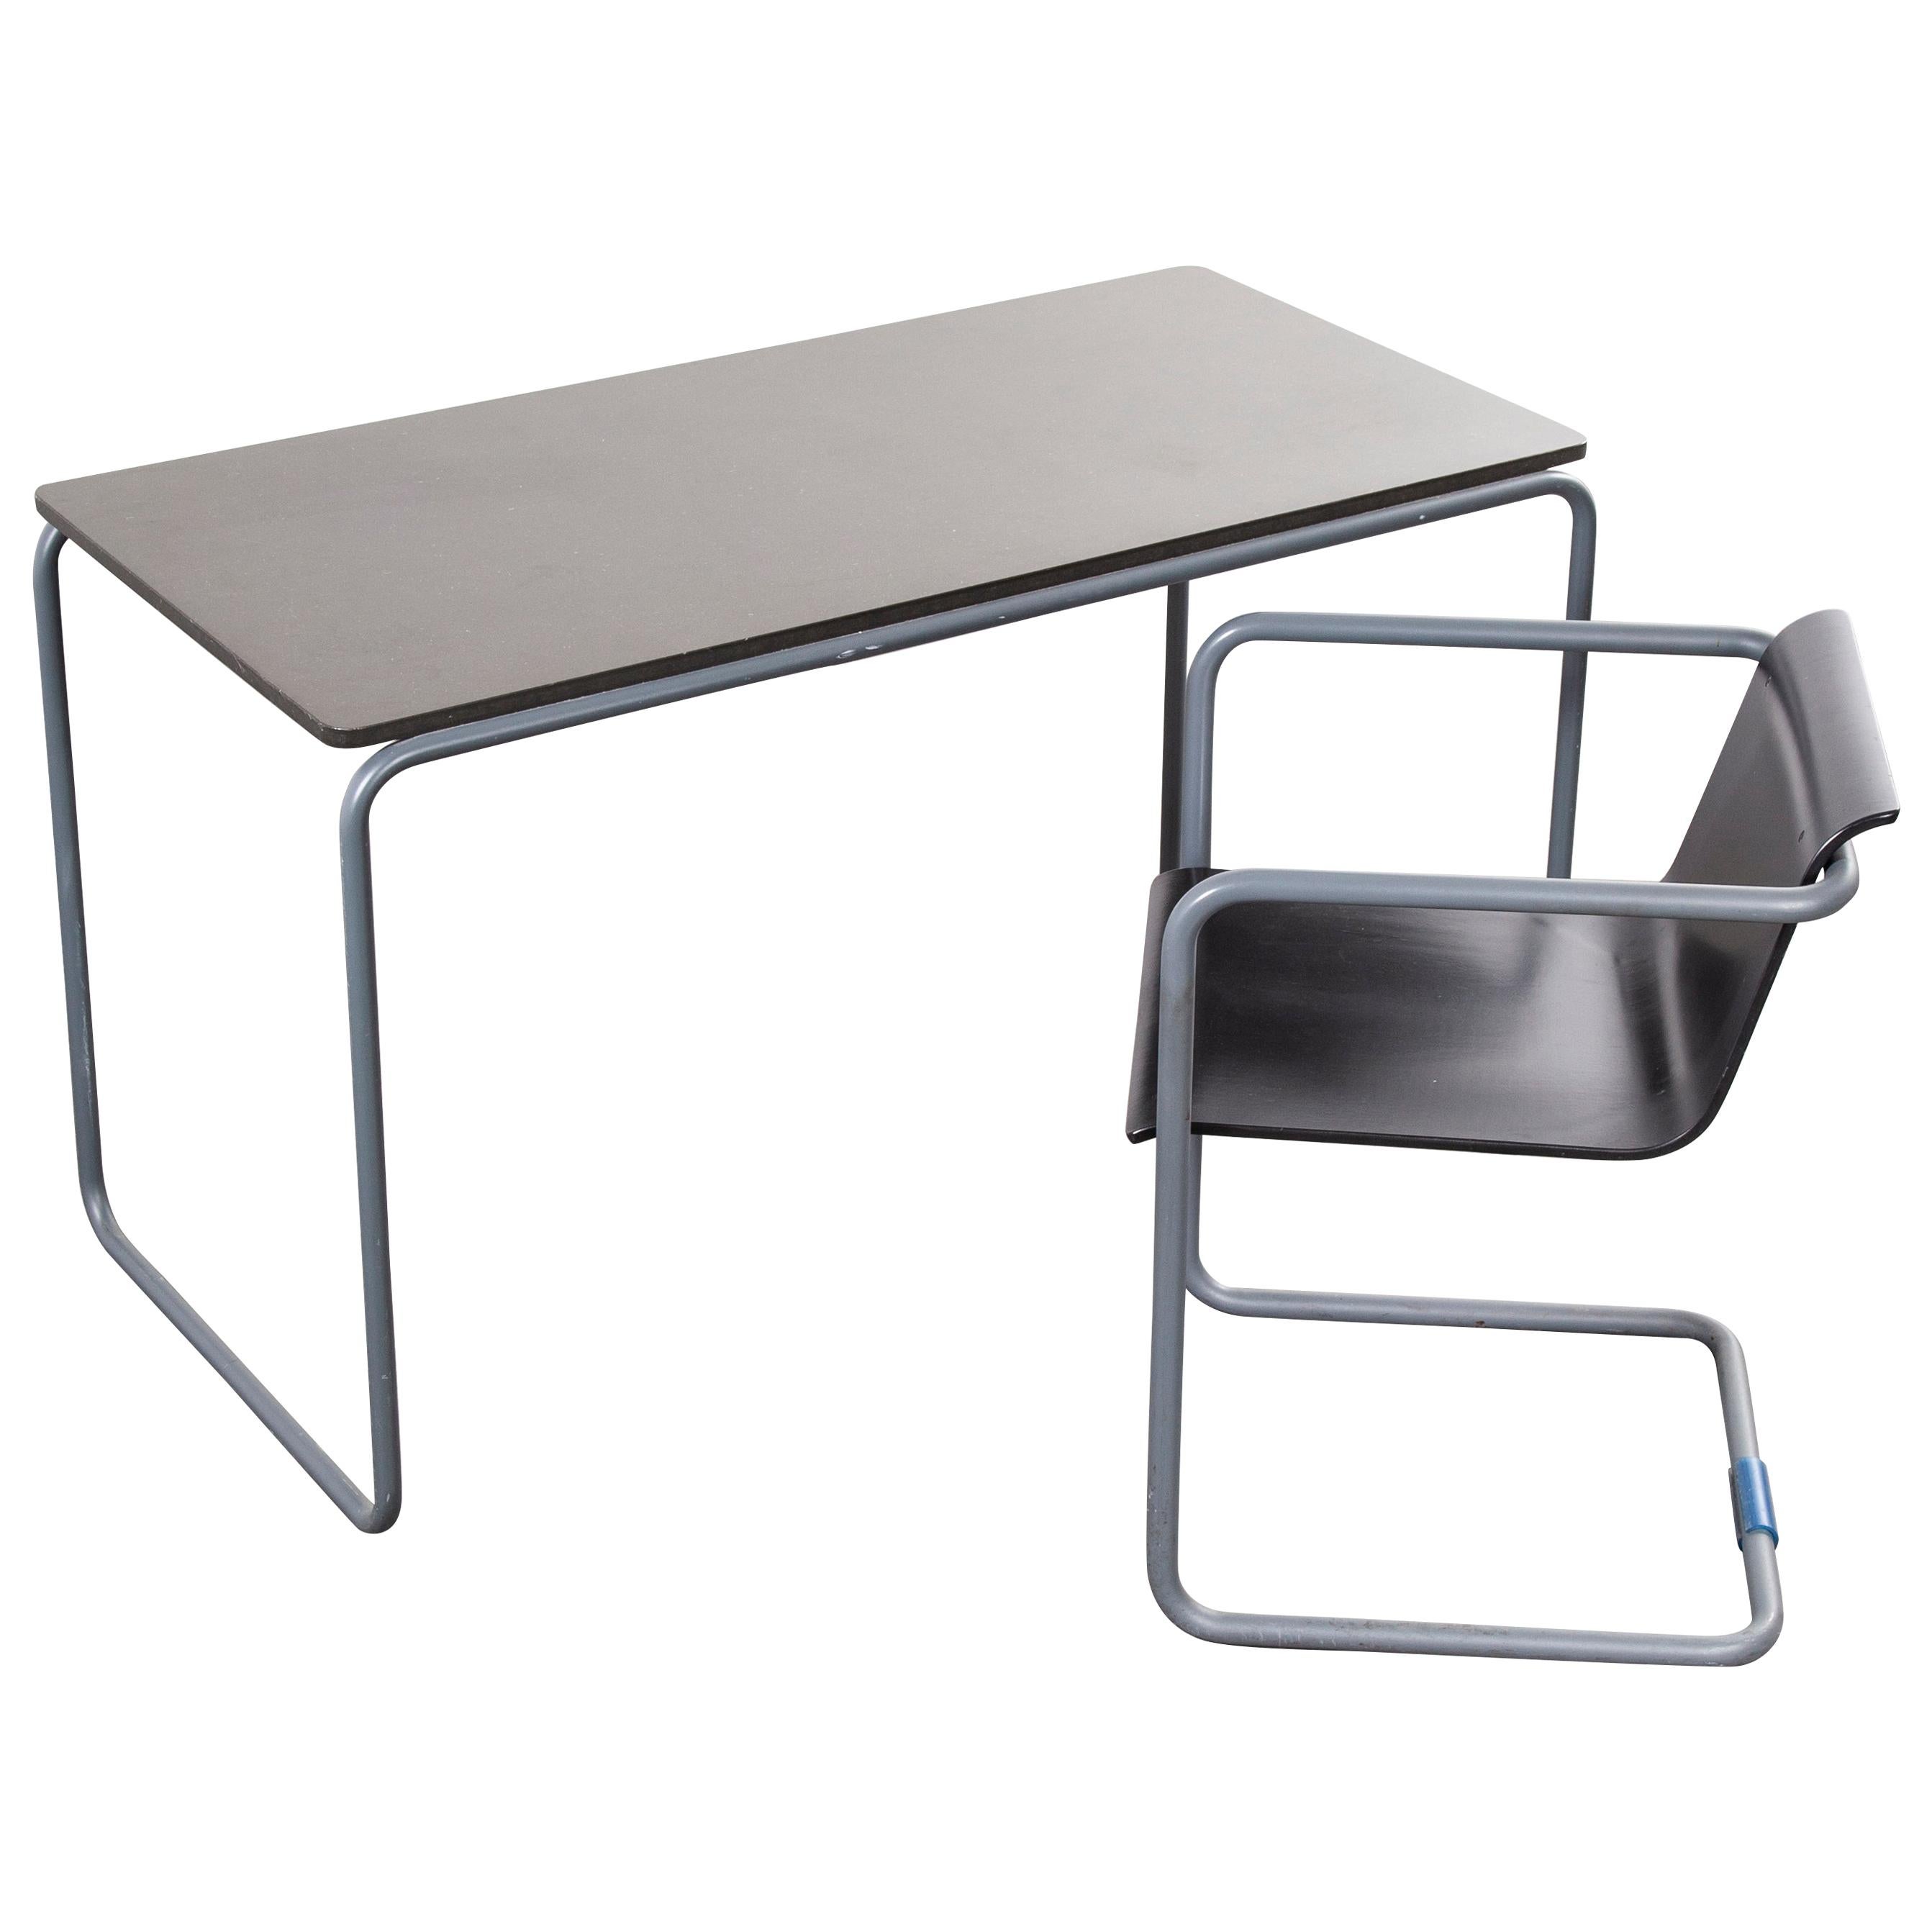 Konstantin Grcic Tubular Desk and Chair Set by Thonet for Muji 'After  Breuer' at 1stDibs | muji thonet, muji dining set, konstantin grcic muji